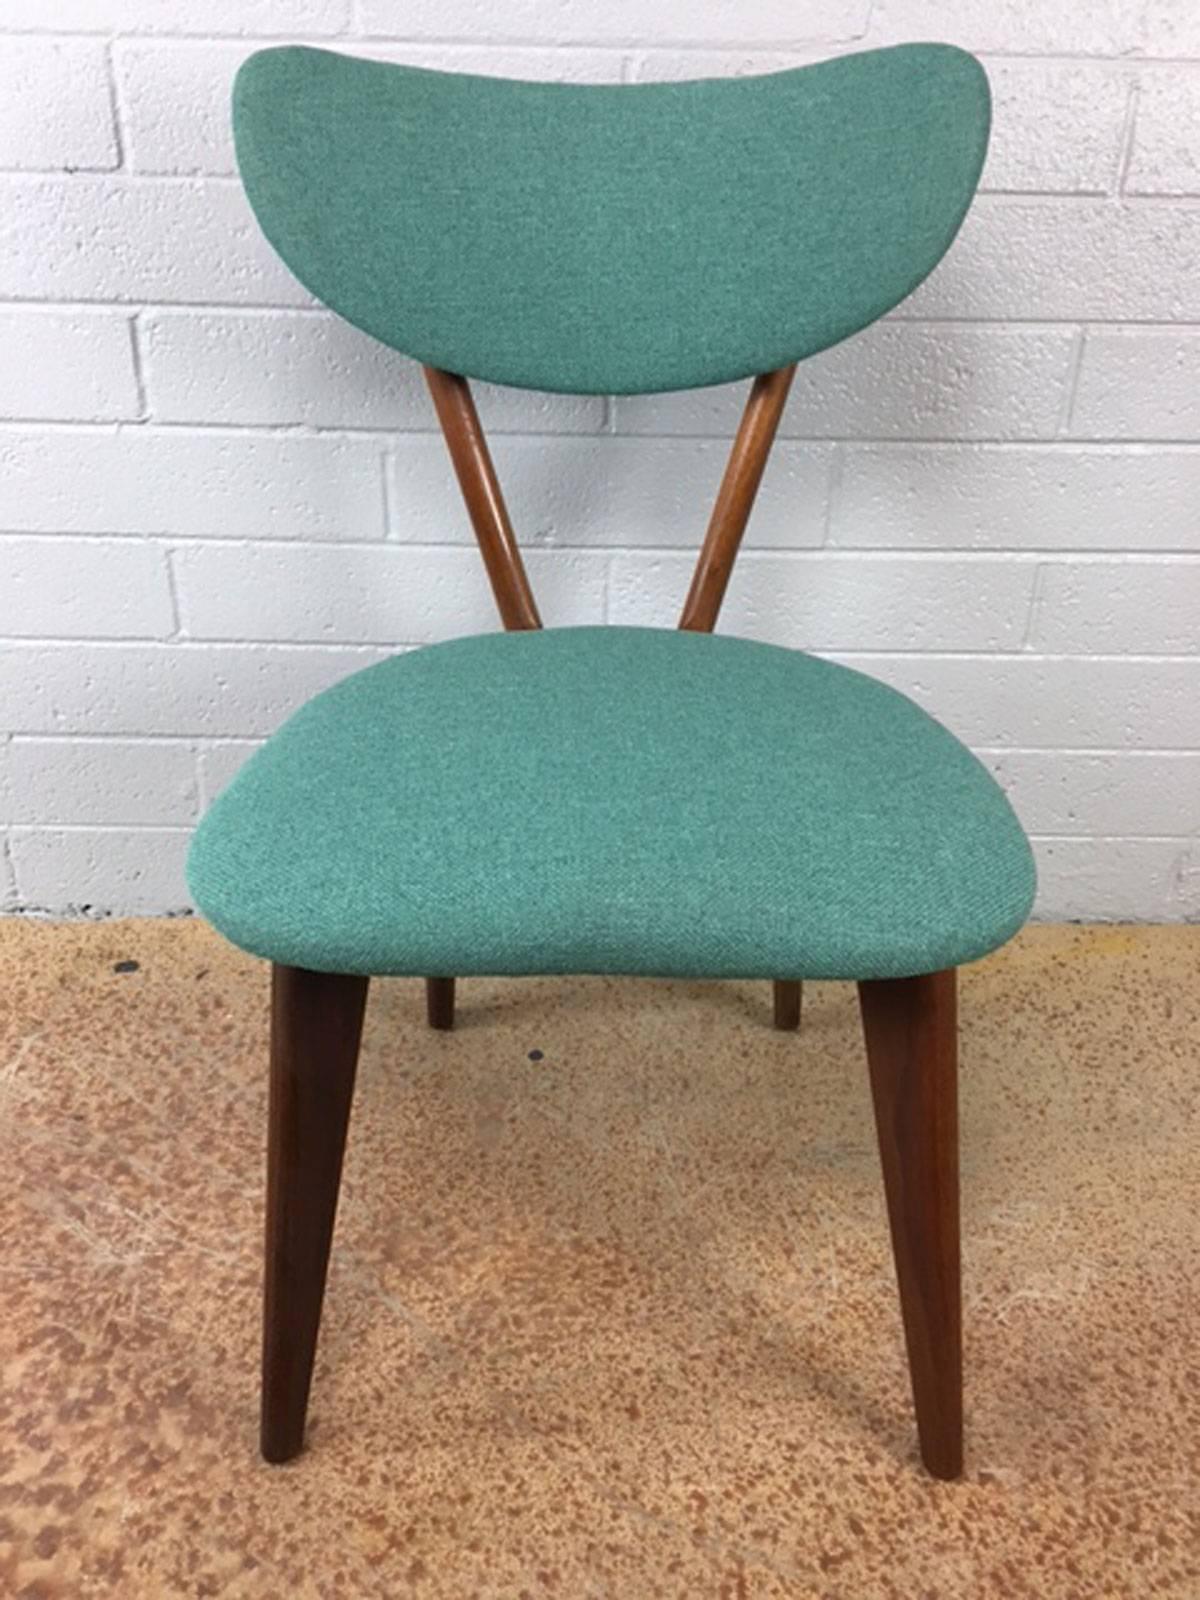 Danish side chair by Kelbe manufacturing. Walnut, circa 1940s. Reupholstered.